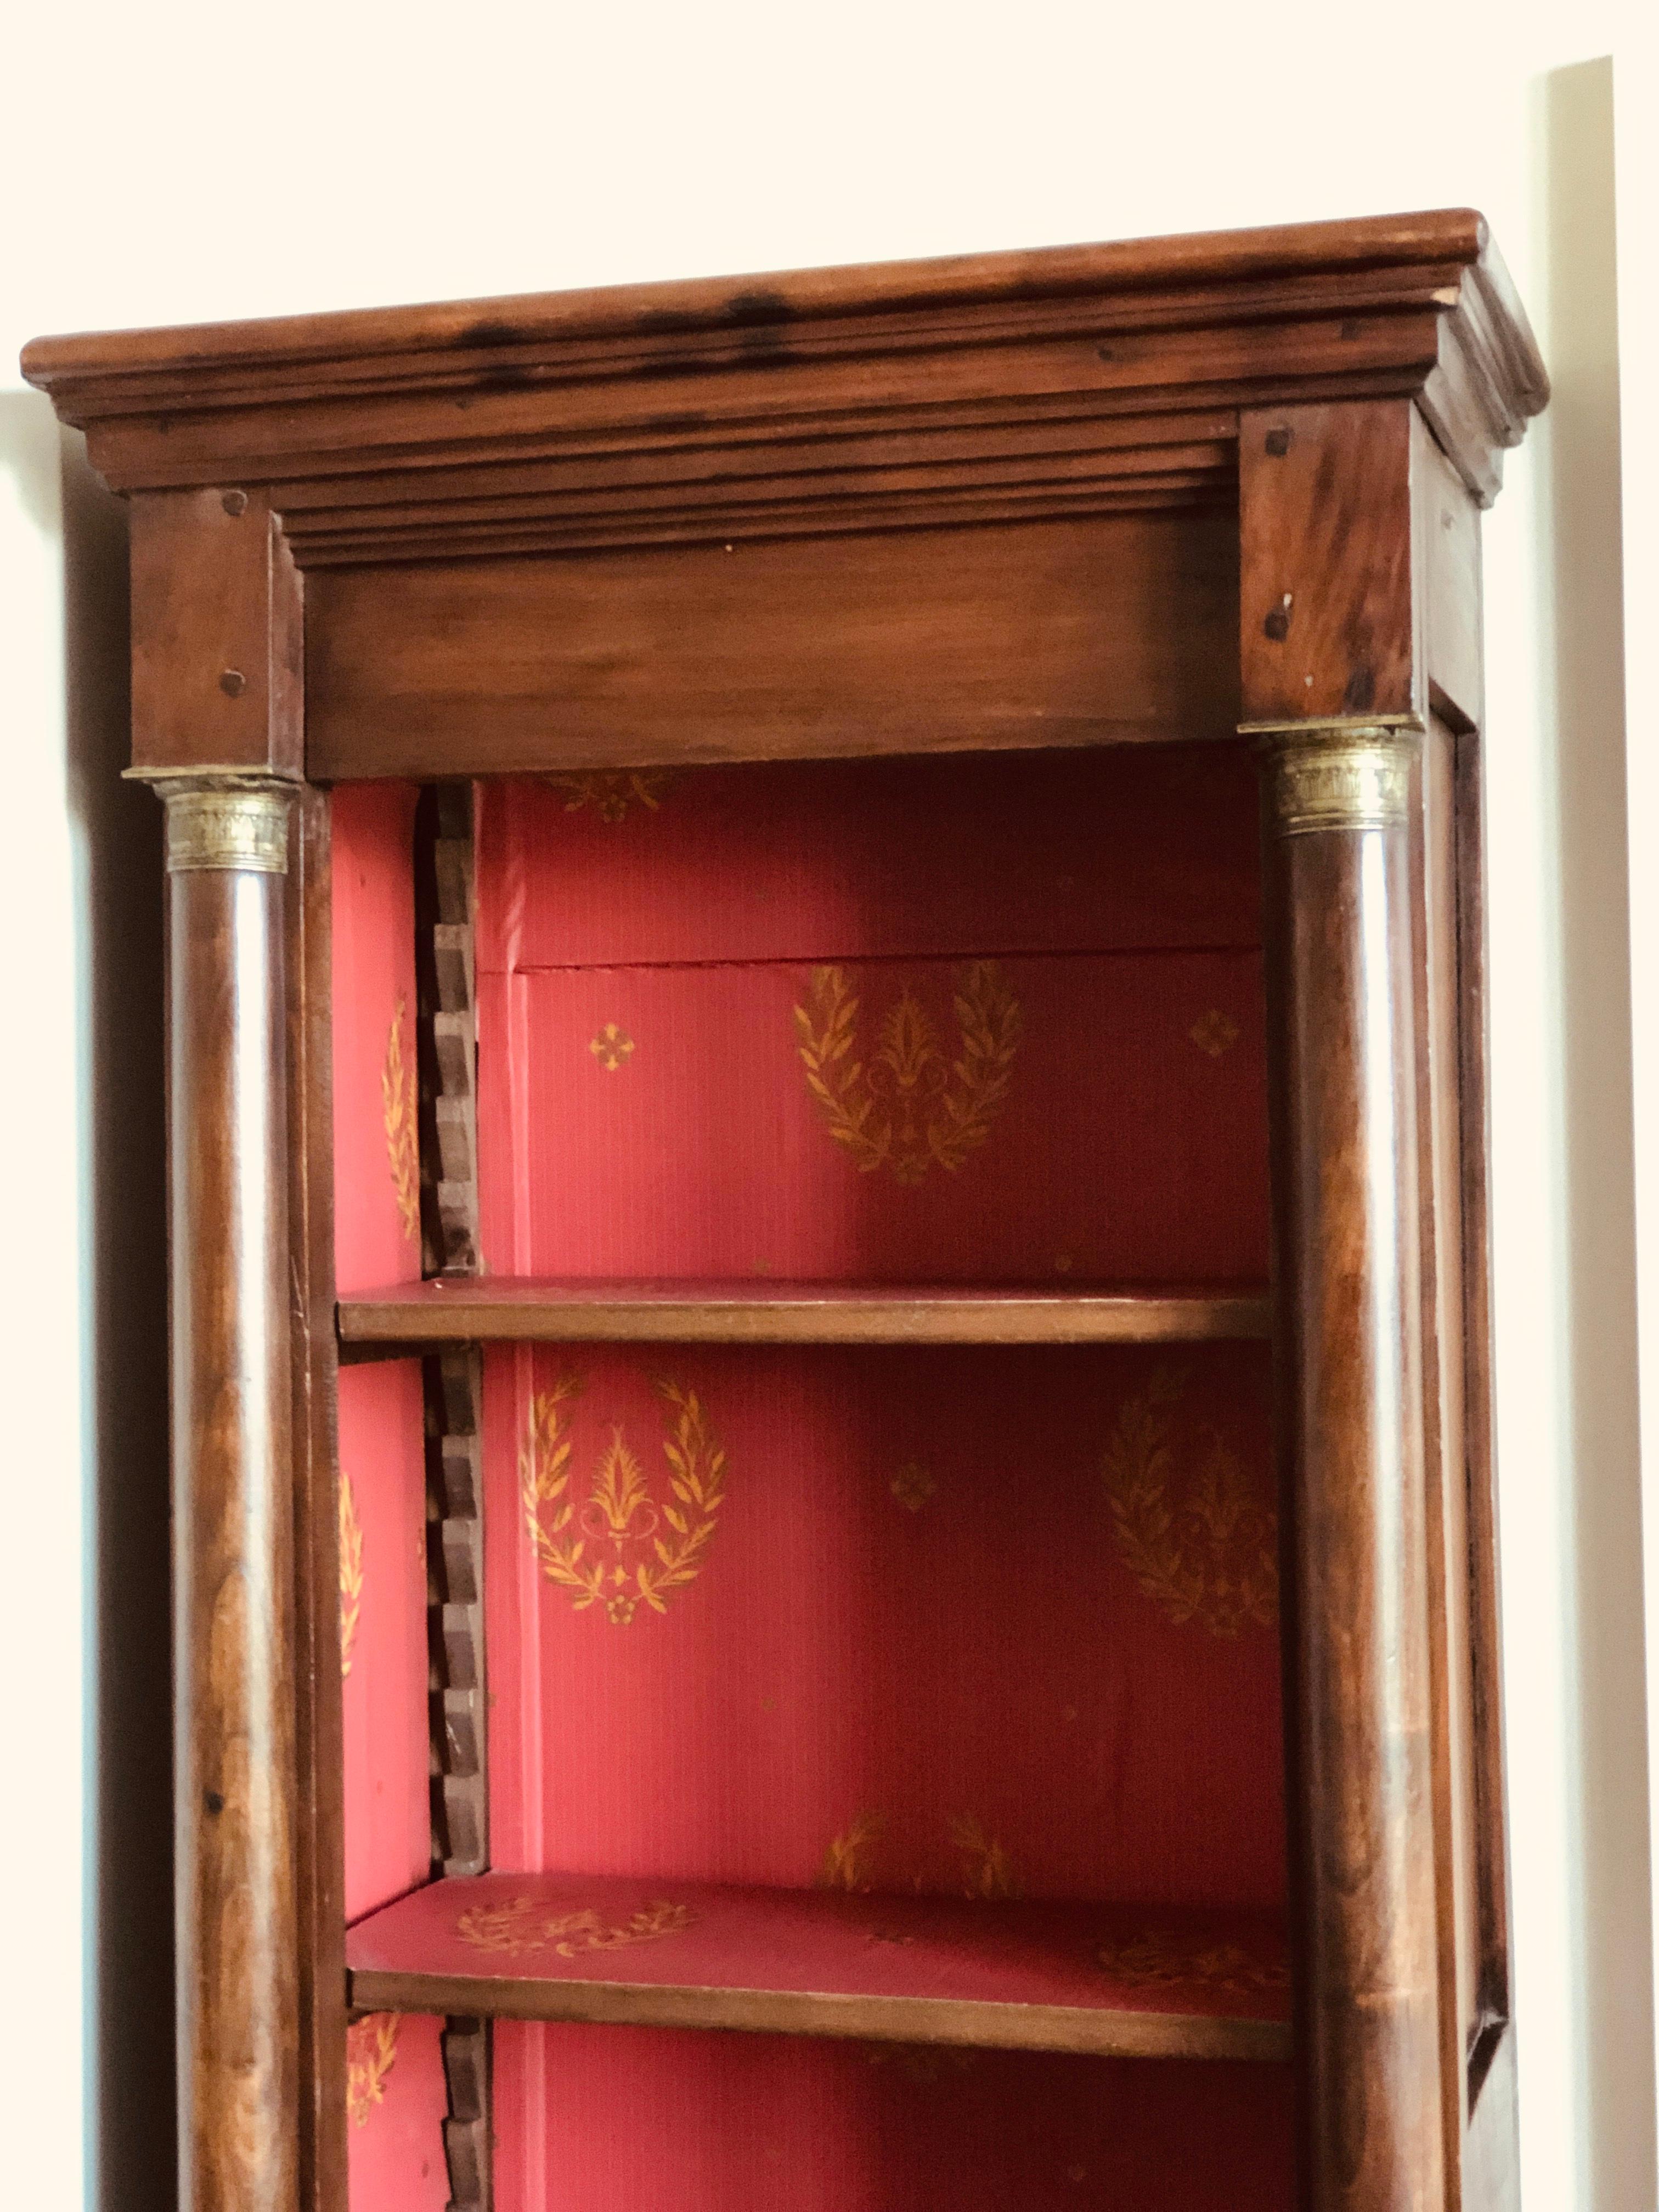 French hand carved mahogany bookcase in Empire style upholstered with red paper with gold decorations.
Three adjustable shelves.
France, circa 1920.